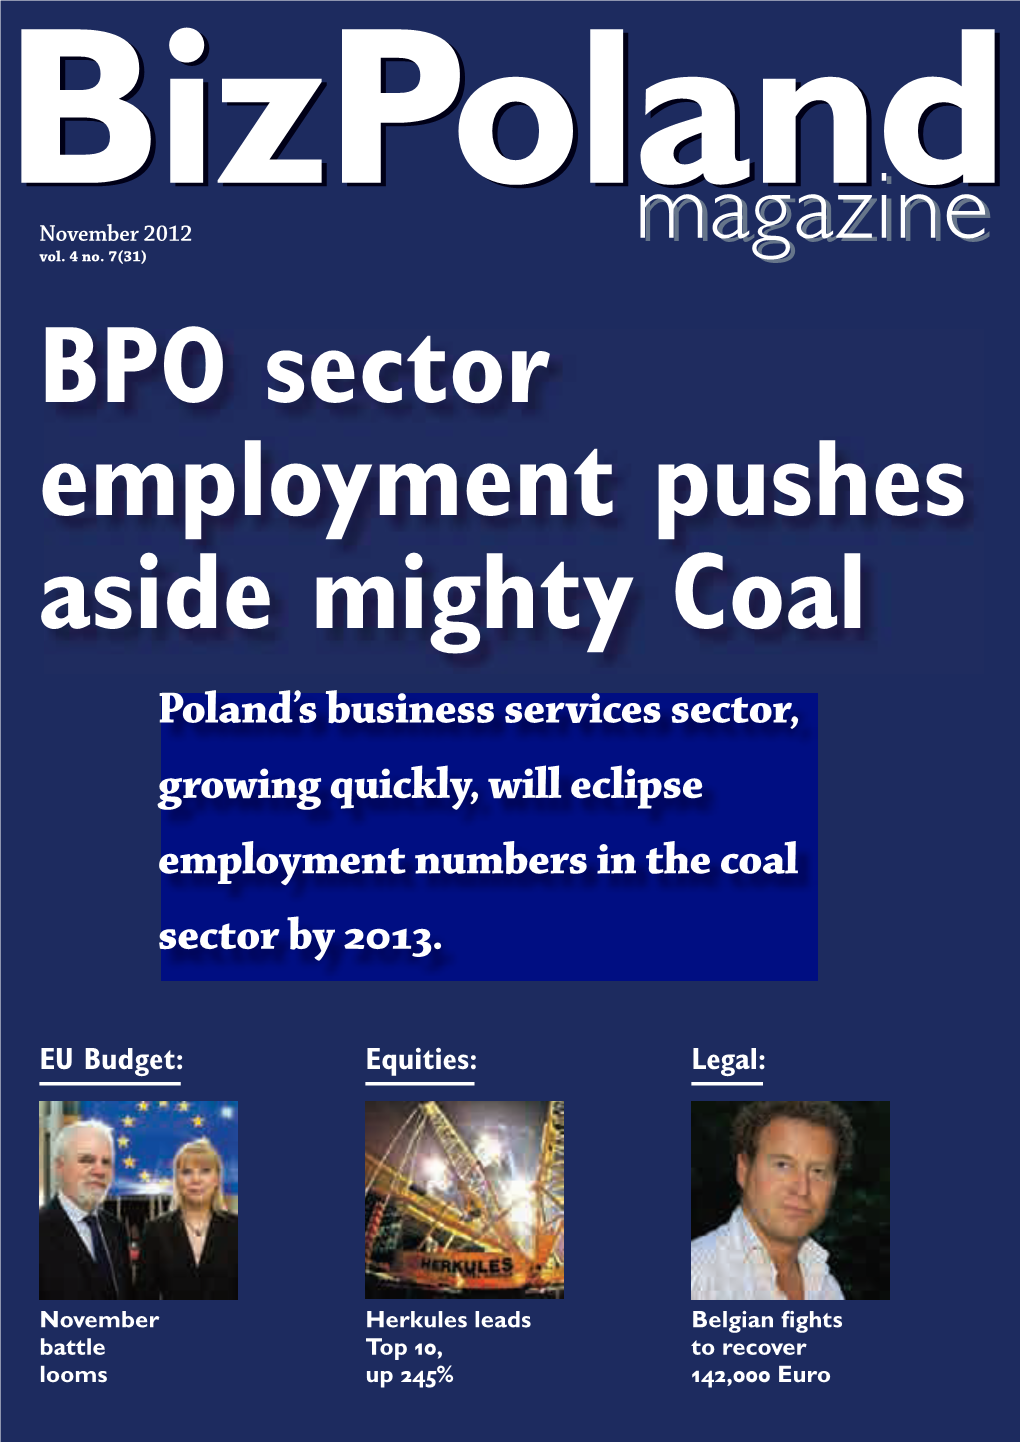 BPO Sector Employment Pushes Aside Mighty Coal Poland’S Business Services Sector, Growing Quickly, Will Eclipse Employment Numbers in the Coal Sector by 2013